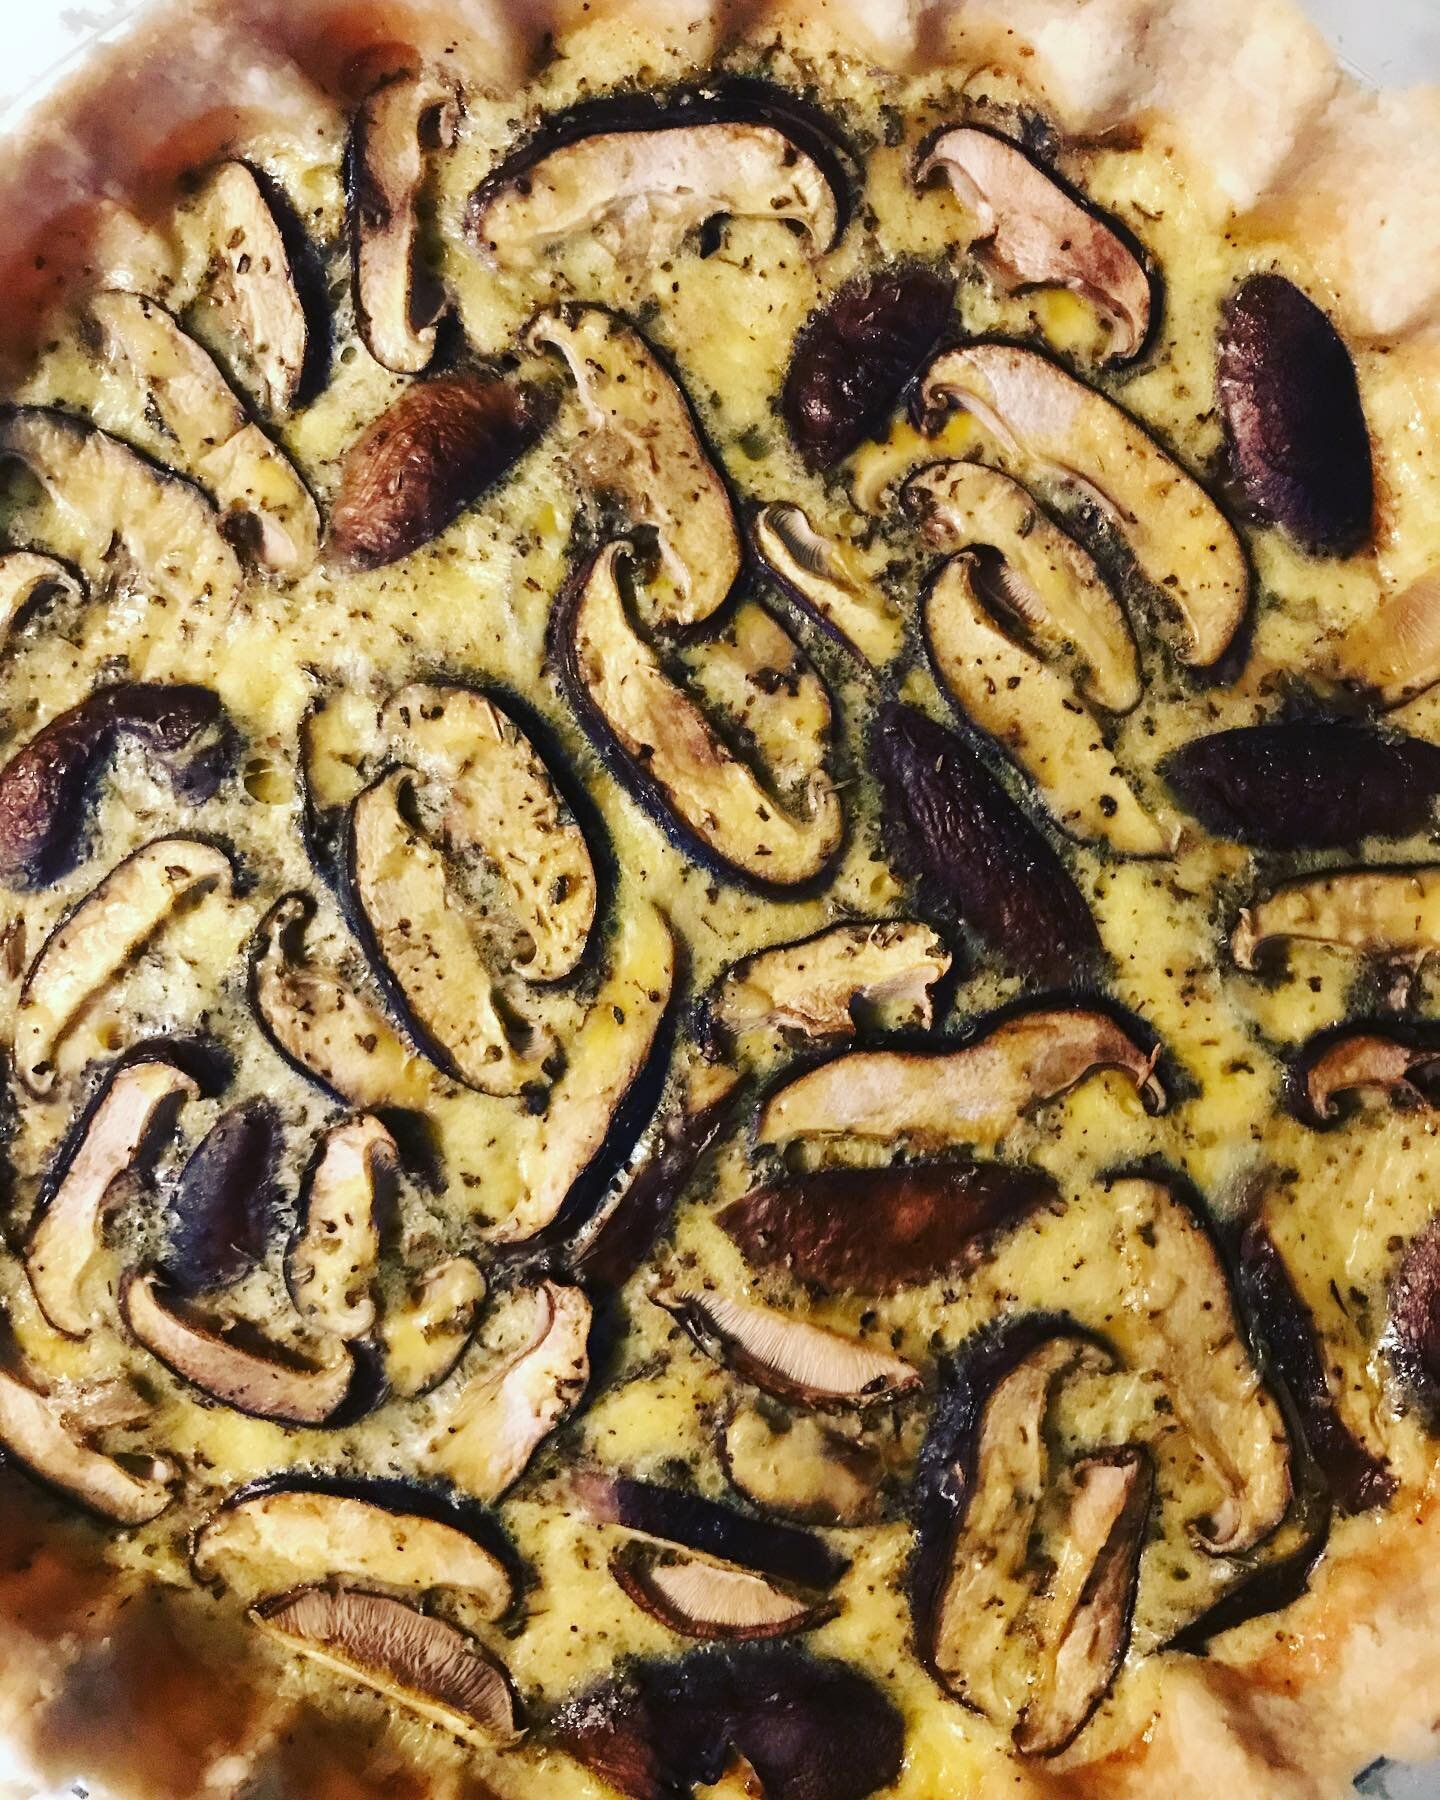 #glutenfree#quiche#organiceggs#organic#shitakes#grassfedcheddar  why I haven&rsquo;t I made a quiche for you guys before?  Hope everyone had a great thanksgiving, it was such a nice day. ☀️ don&rsquo;t want leftovers?  Stop in for something different